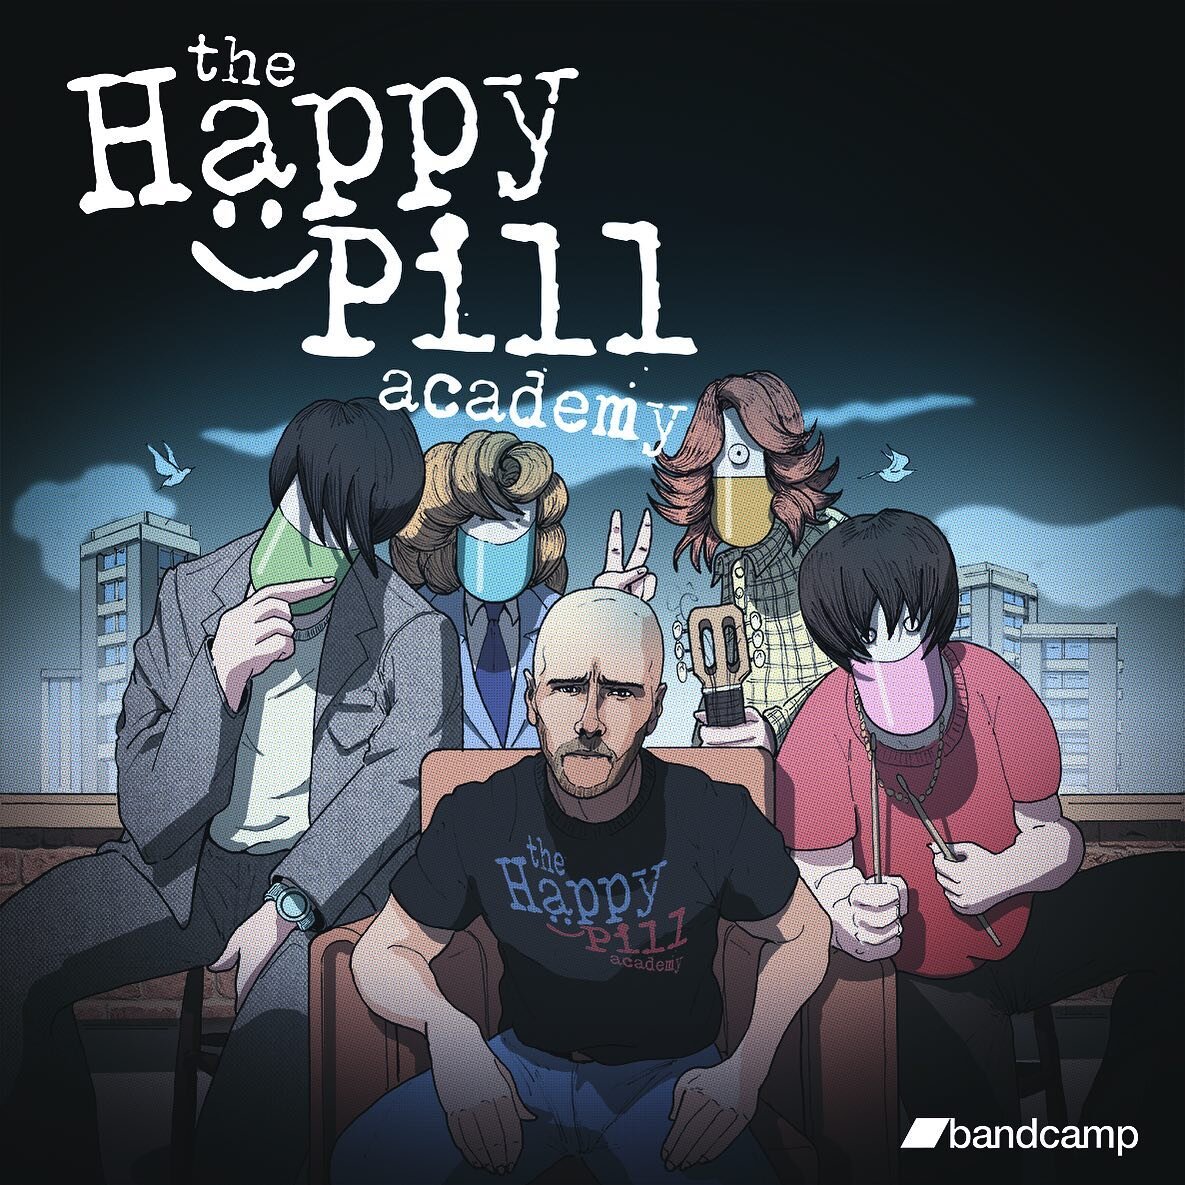 #BandcampFriday VS @pillacademy - Great cause! Great music. 

All music sales from the *The Happy Pill Academy* @Bandcamp account on Friday 6th from 7am GMT will be donated to #DoctorsWithoutBorders 🥳

Click through to @pillacademy for details. 

#h